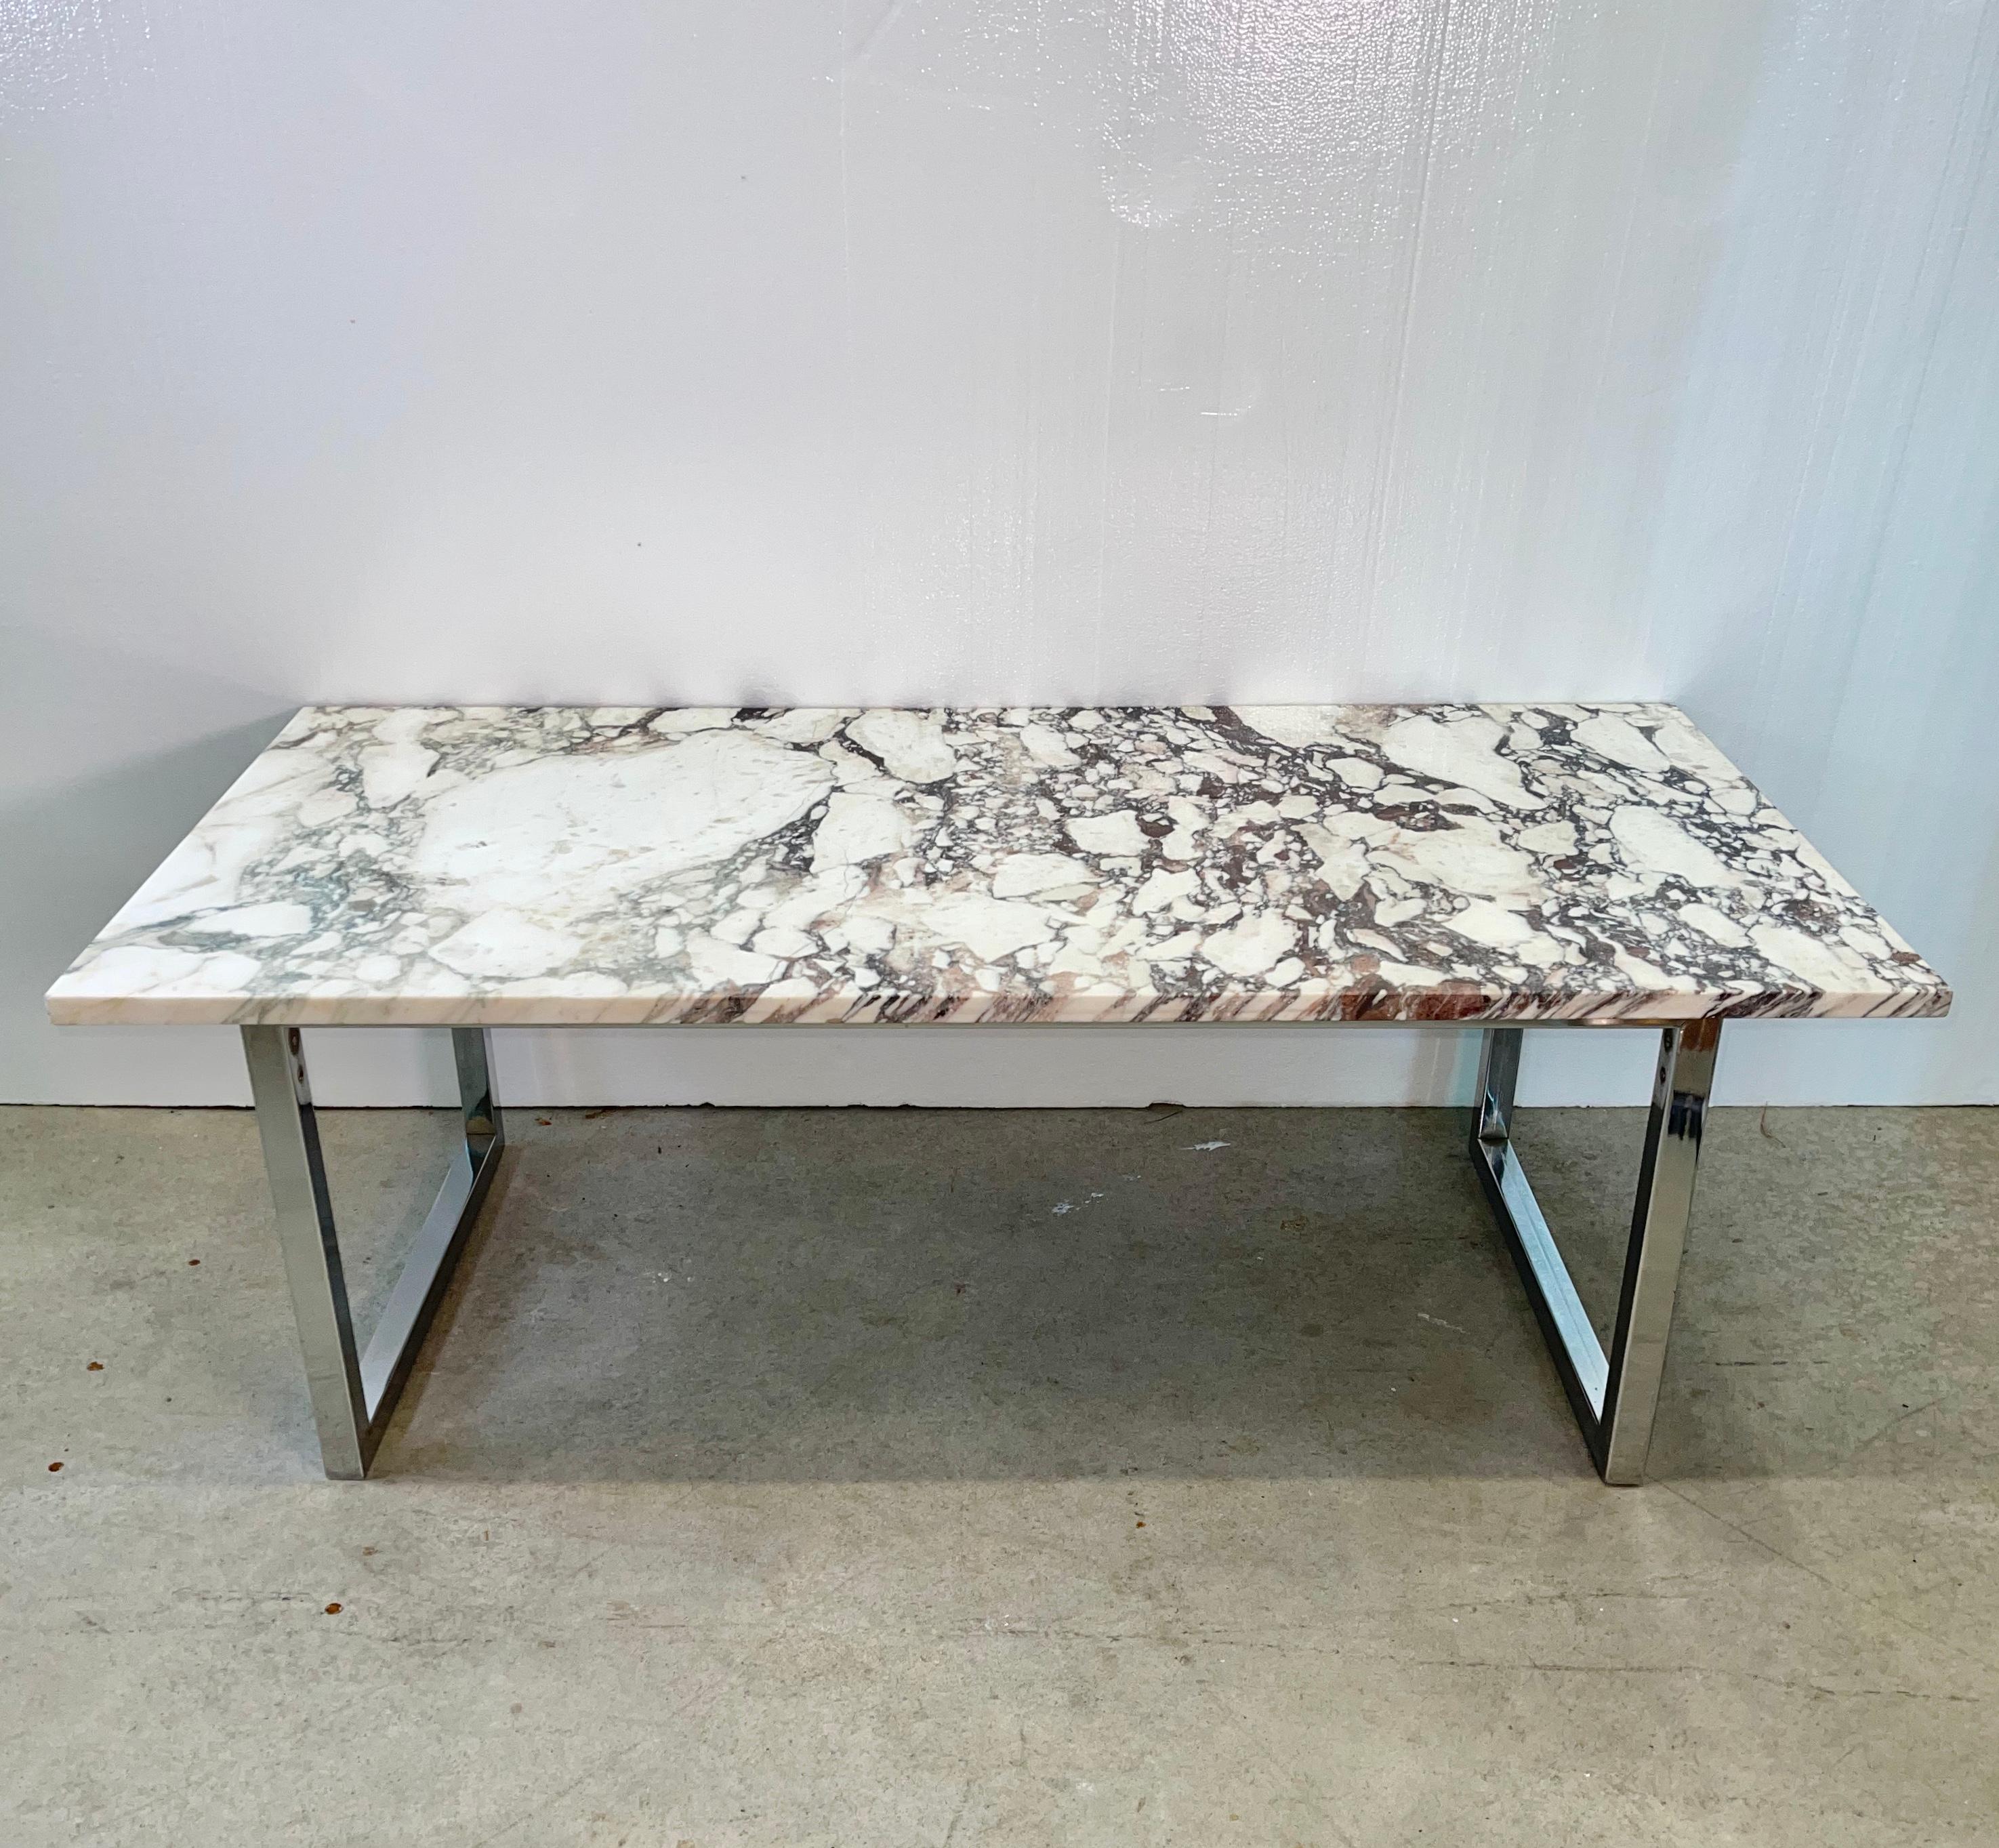 Vintage 1970s cocktail table with a one inch thick rectangular slab of polished white and black marble top on a modernist chromed square tube frame base. Simple clean lines.
Remnants of a label on the underside suggest the marble's origin is Spain